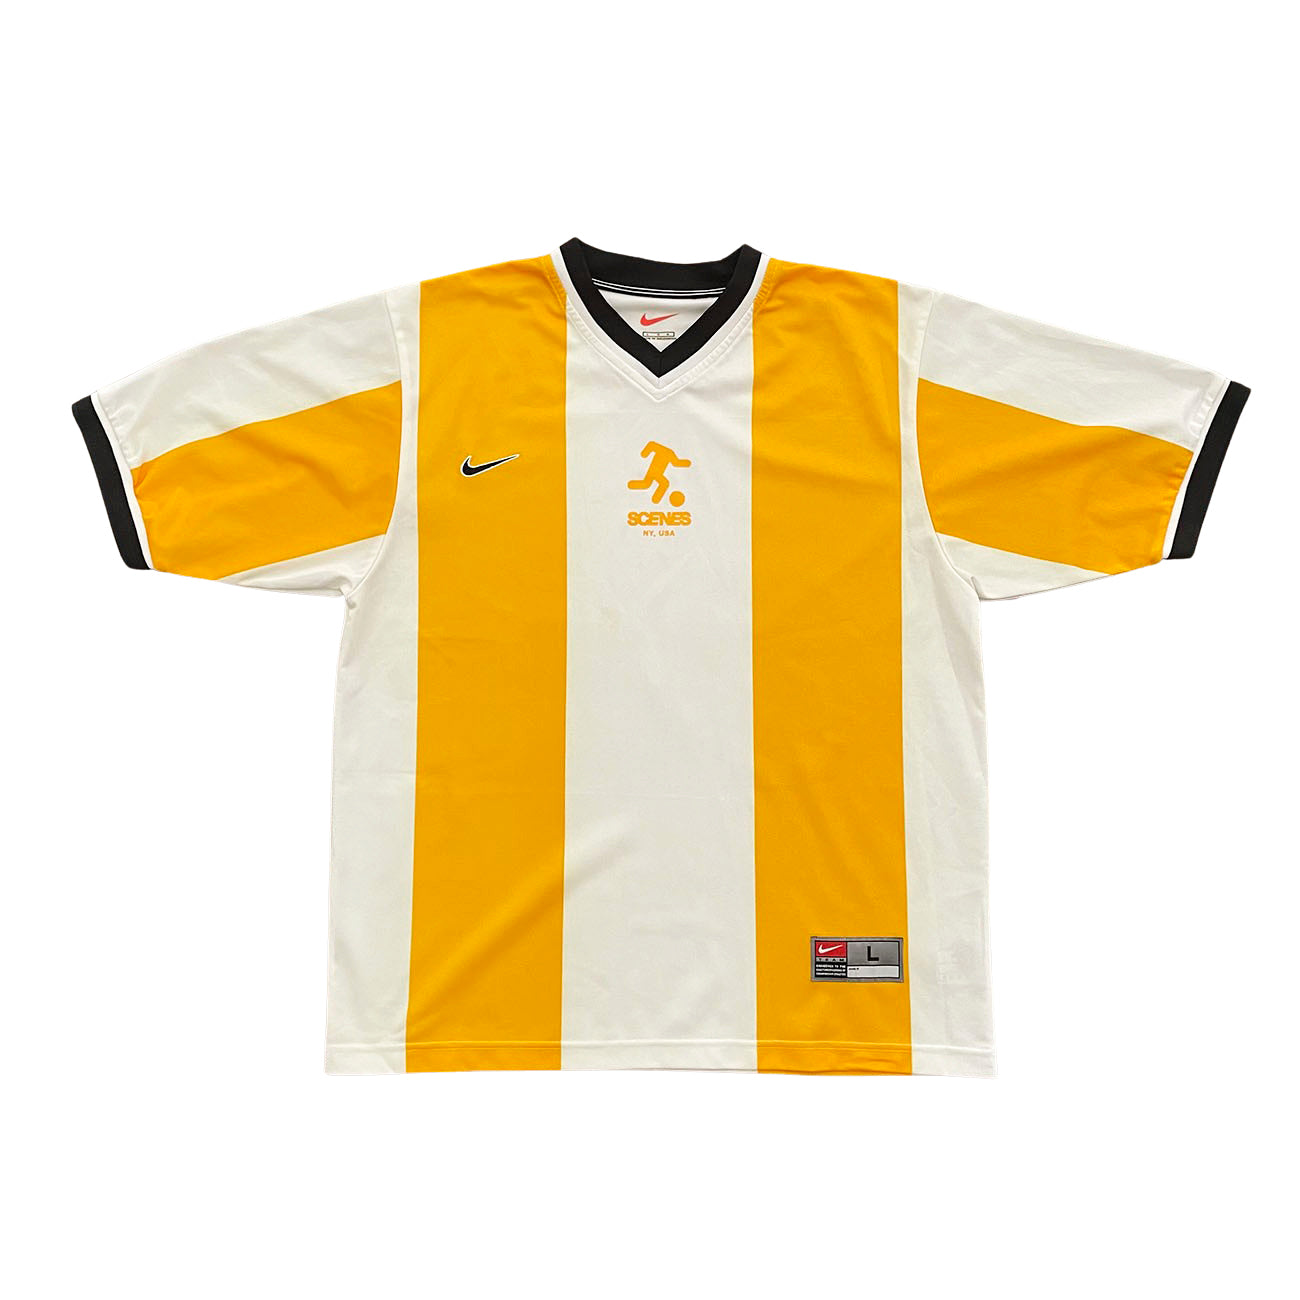 Player-Issue Nike Template Jersey - L